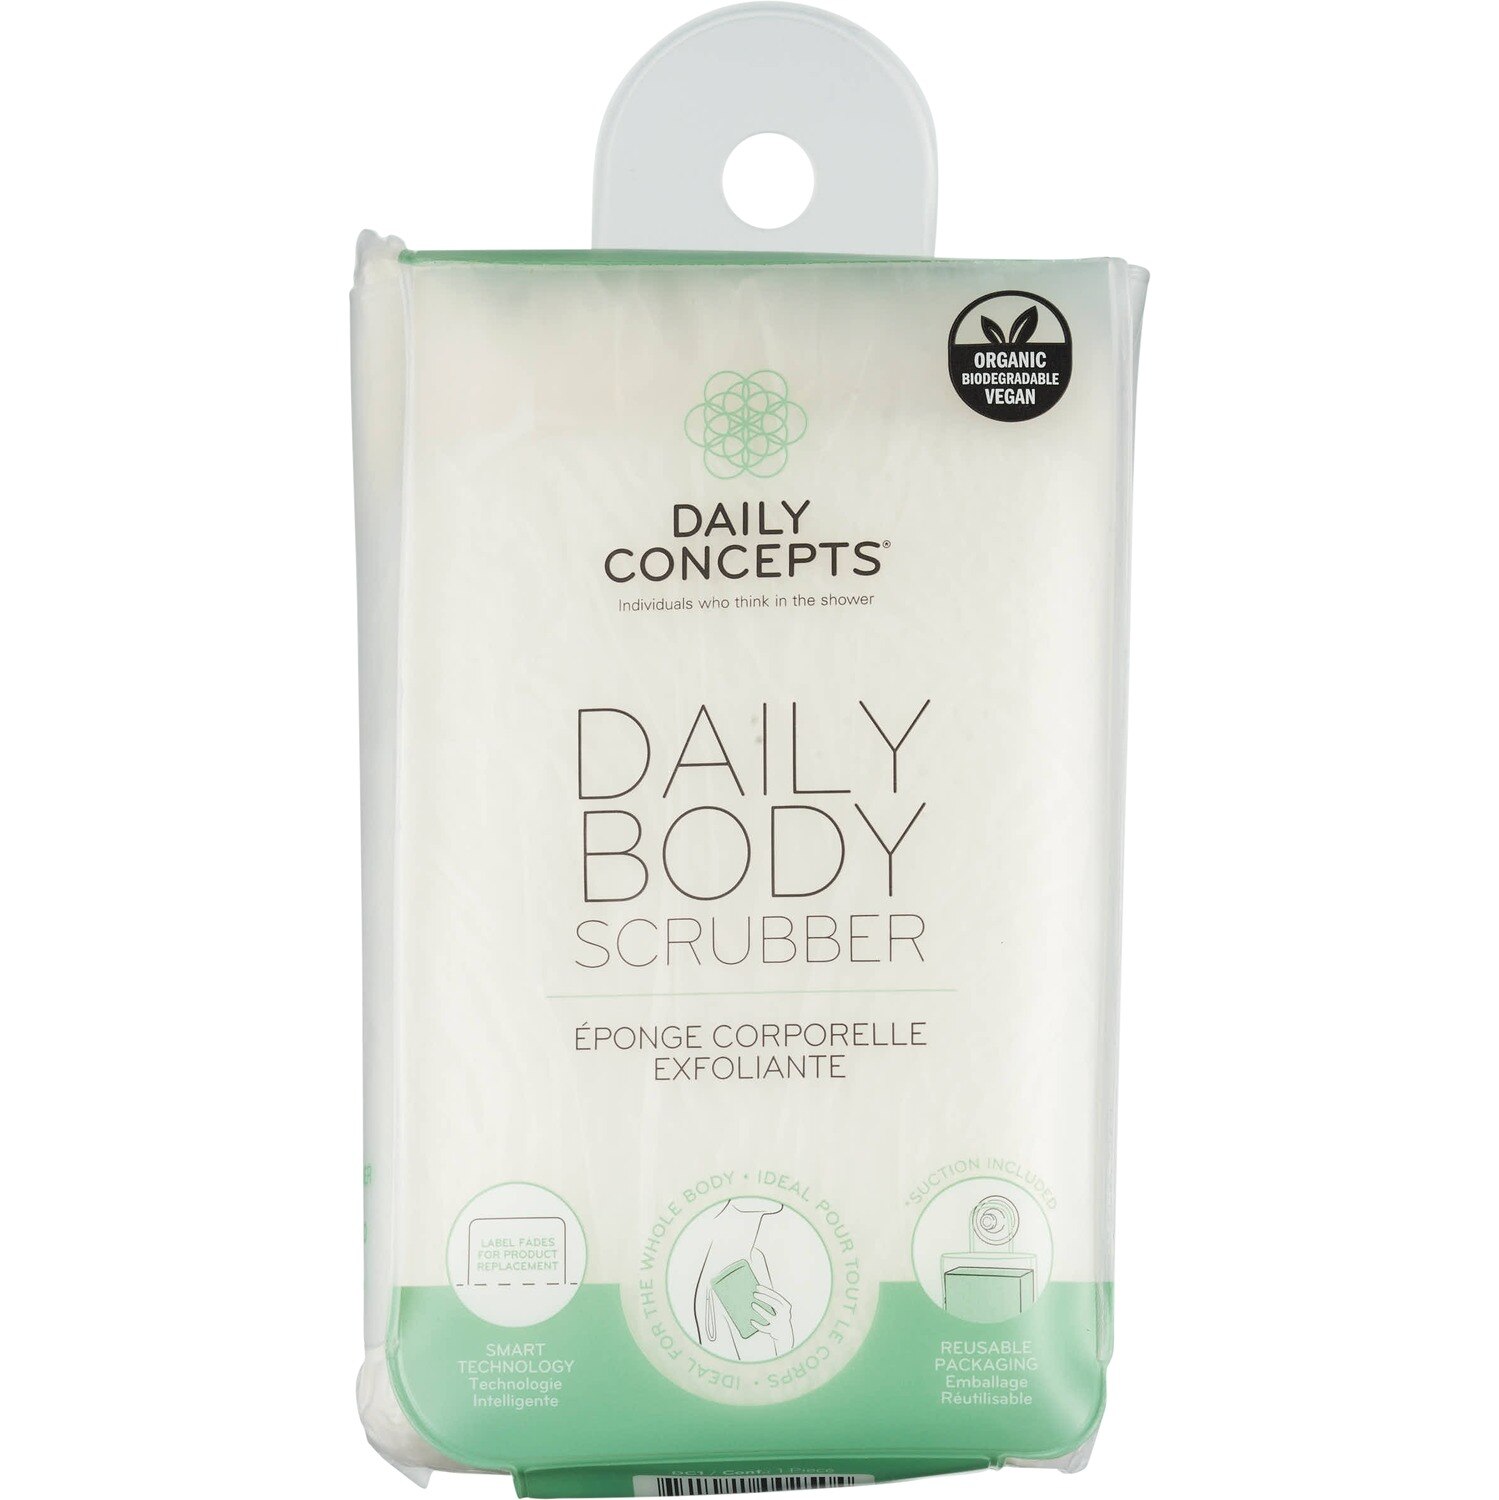 Daily Concepts Daily Body Scrubber, White , CVS